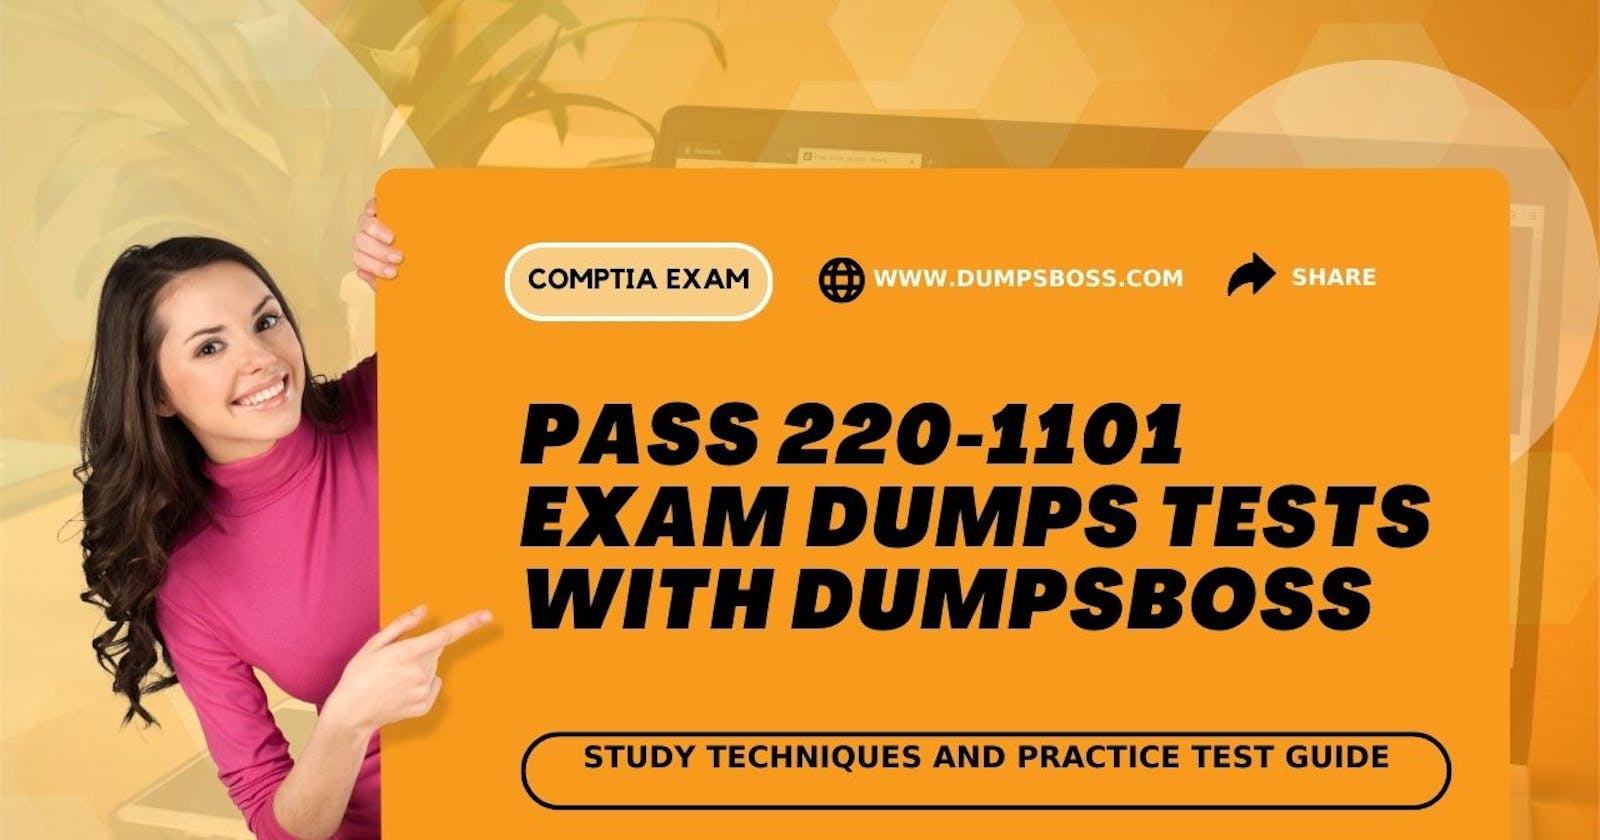 How can you prepare for the 220-1101 Exam Dumps?